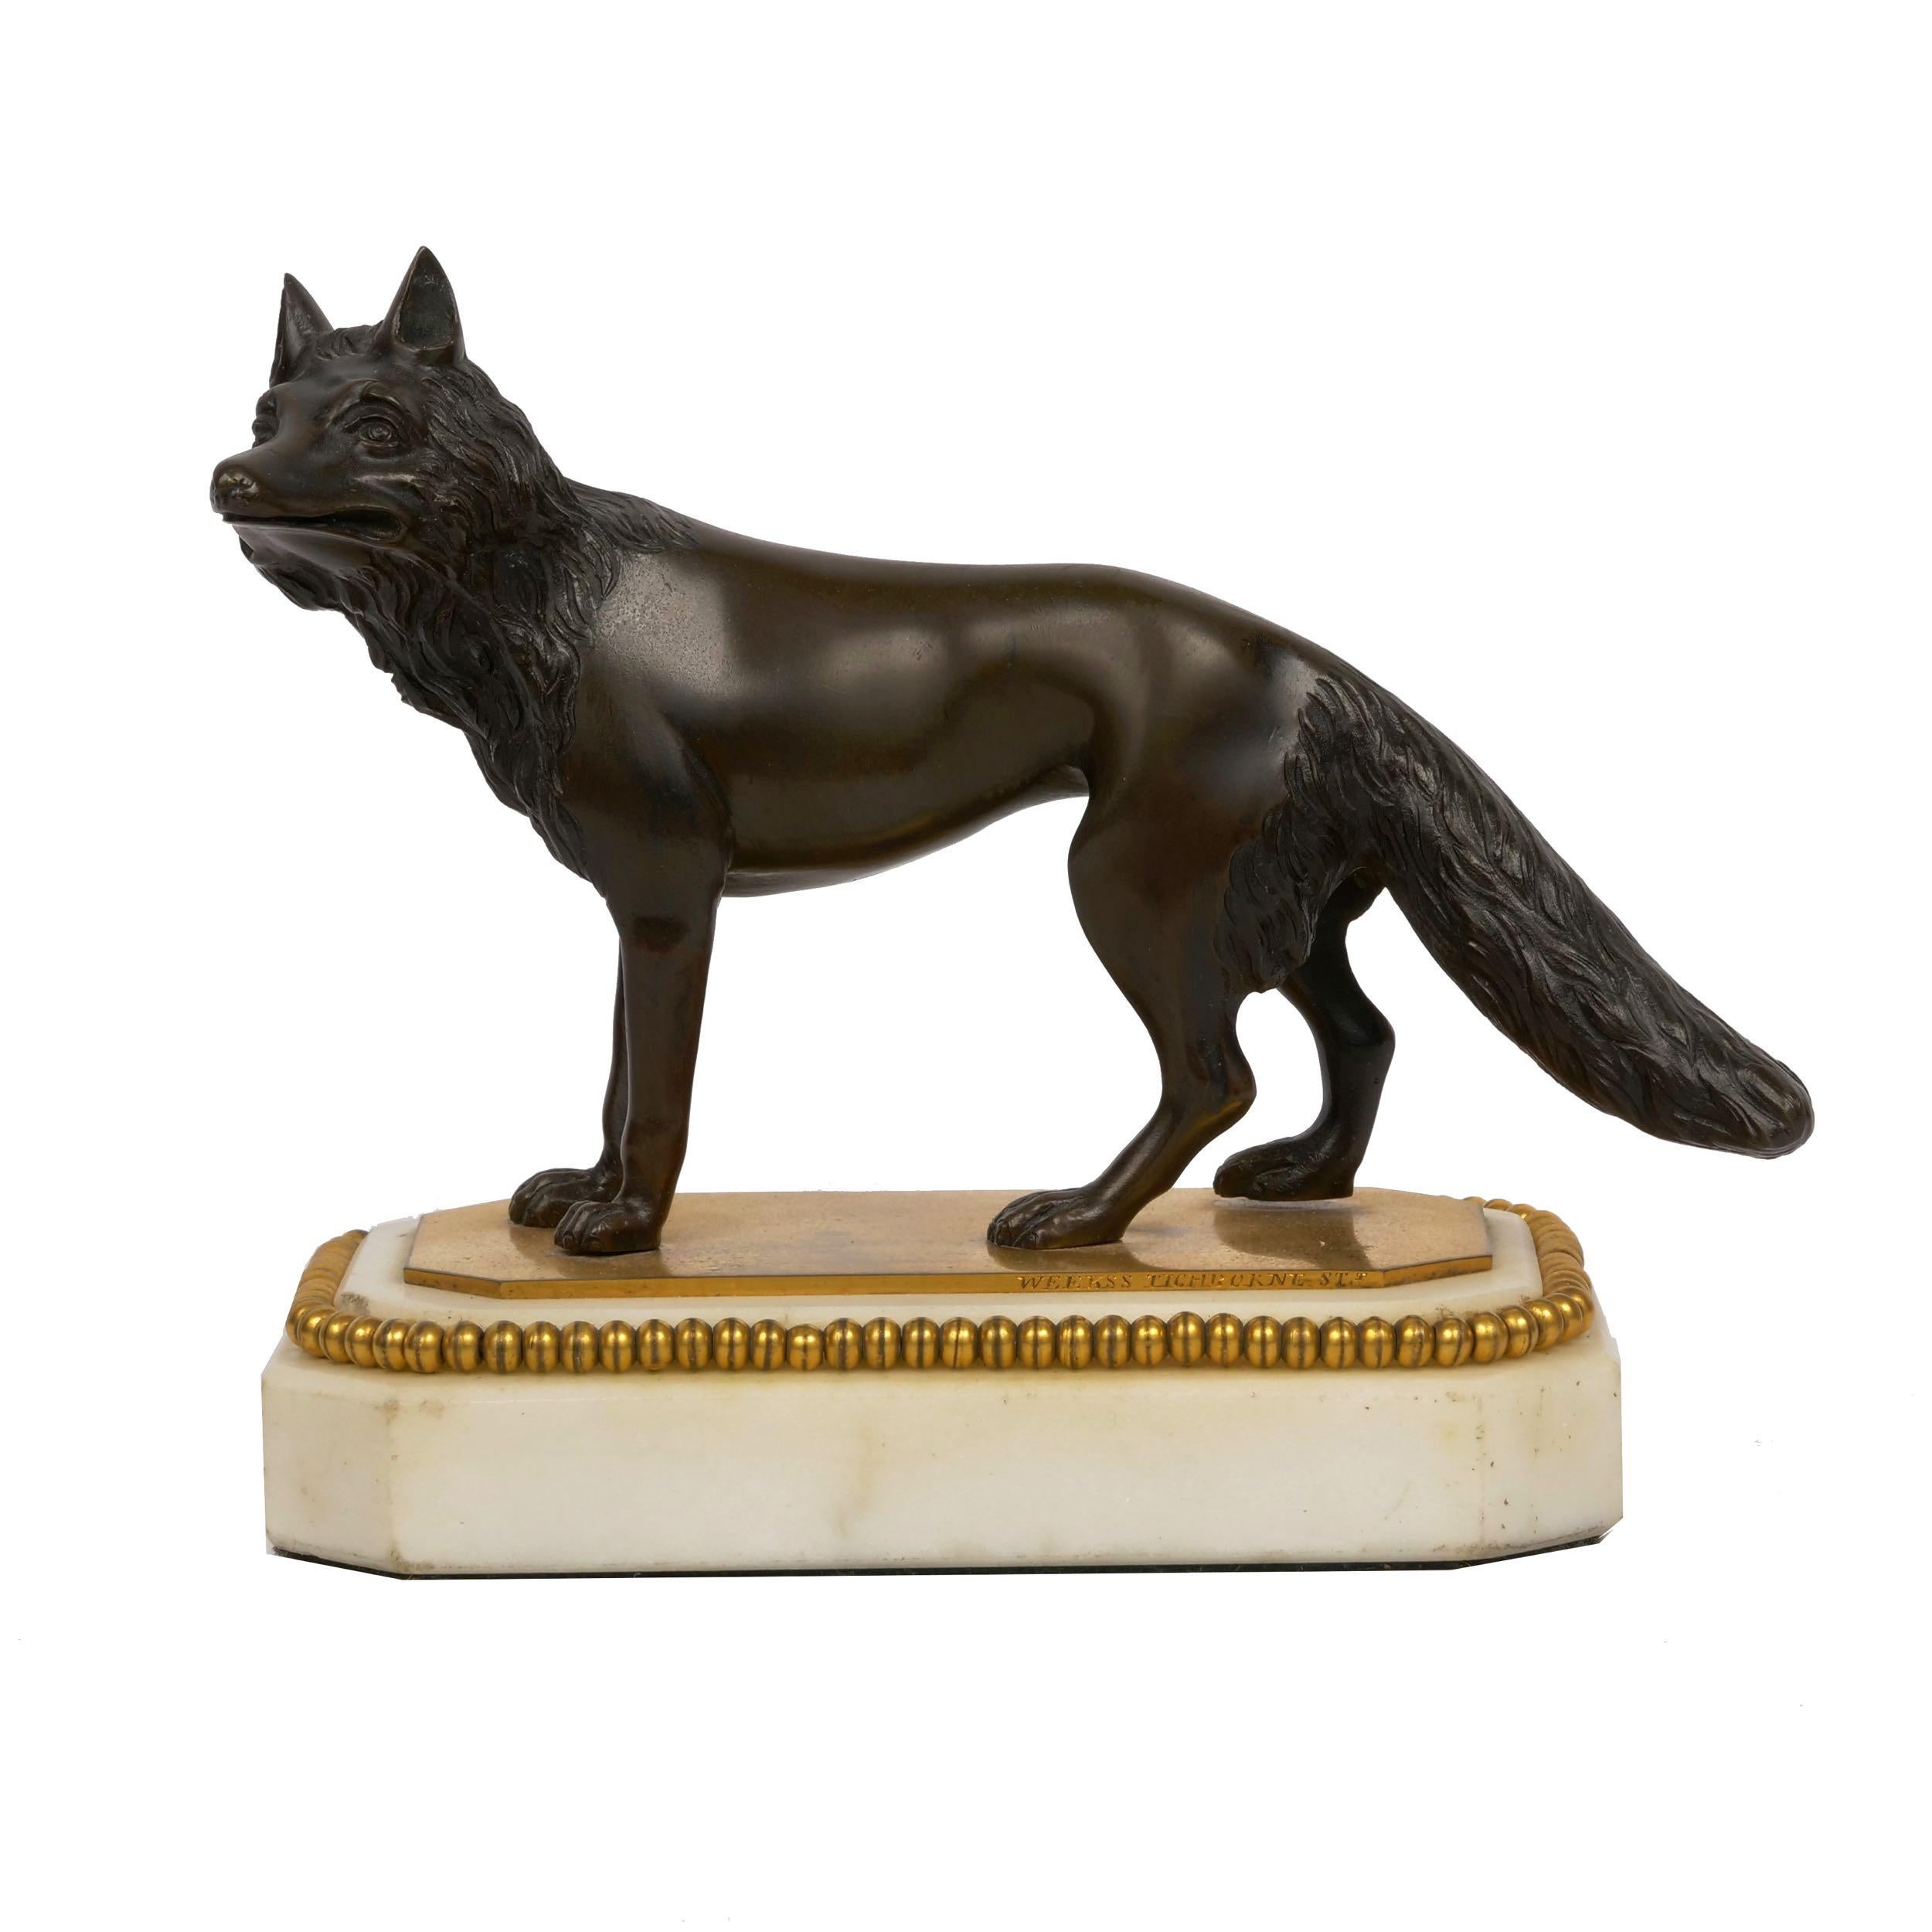 English George III Bronze Fox Sculpture Antique Paperweight by Thomas Weeks, London 